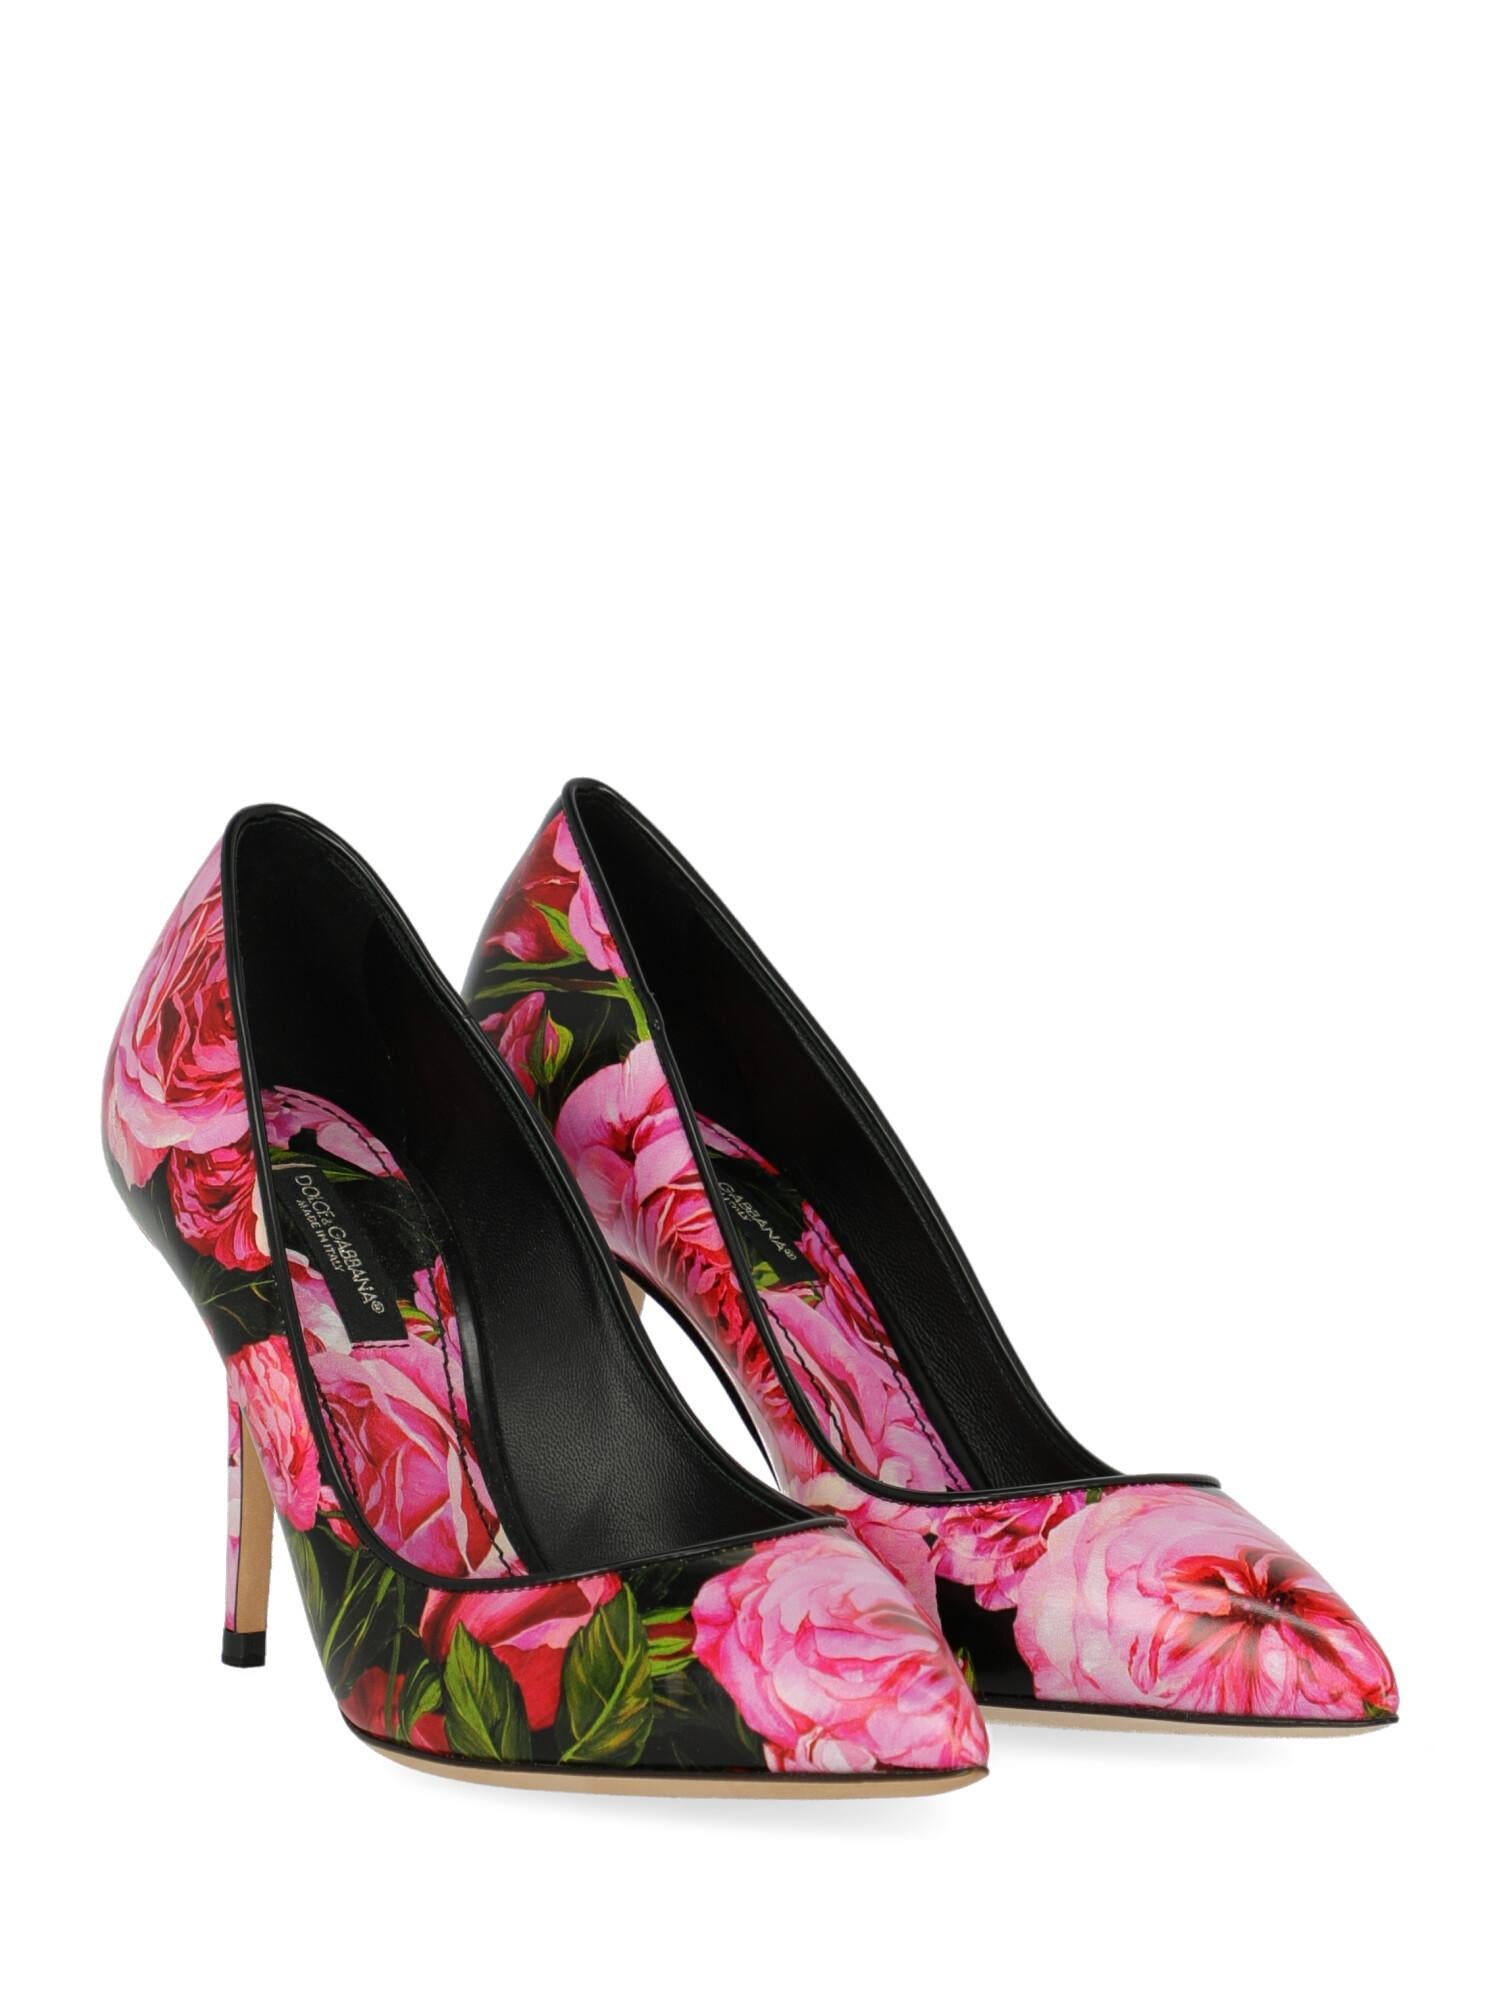 Dolce & Gabbana Women Pumps Black, Pink Leather EU 37 In Excellent Condition For Sale In Milan, IT